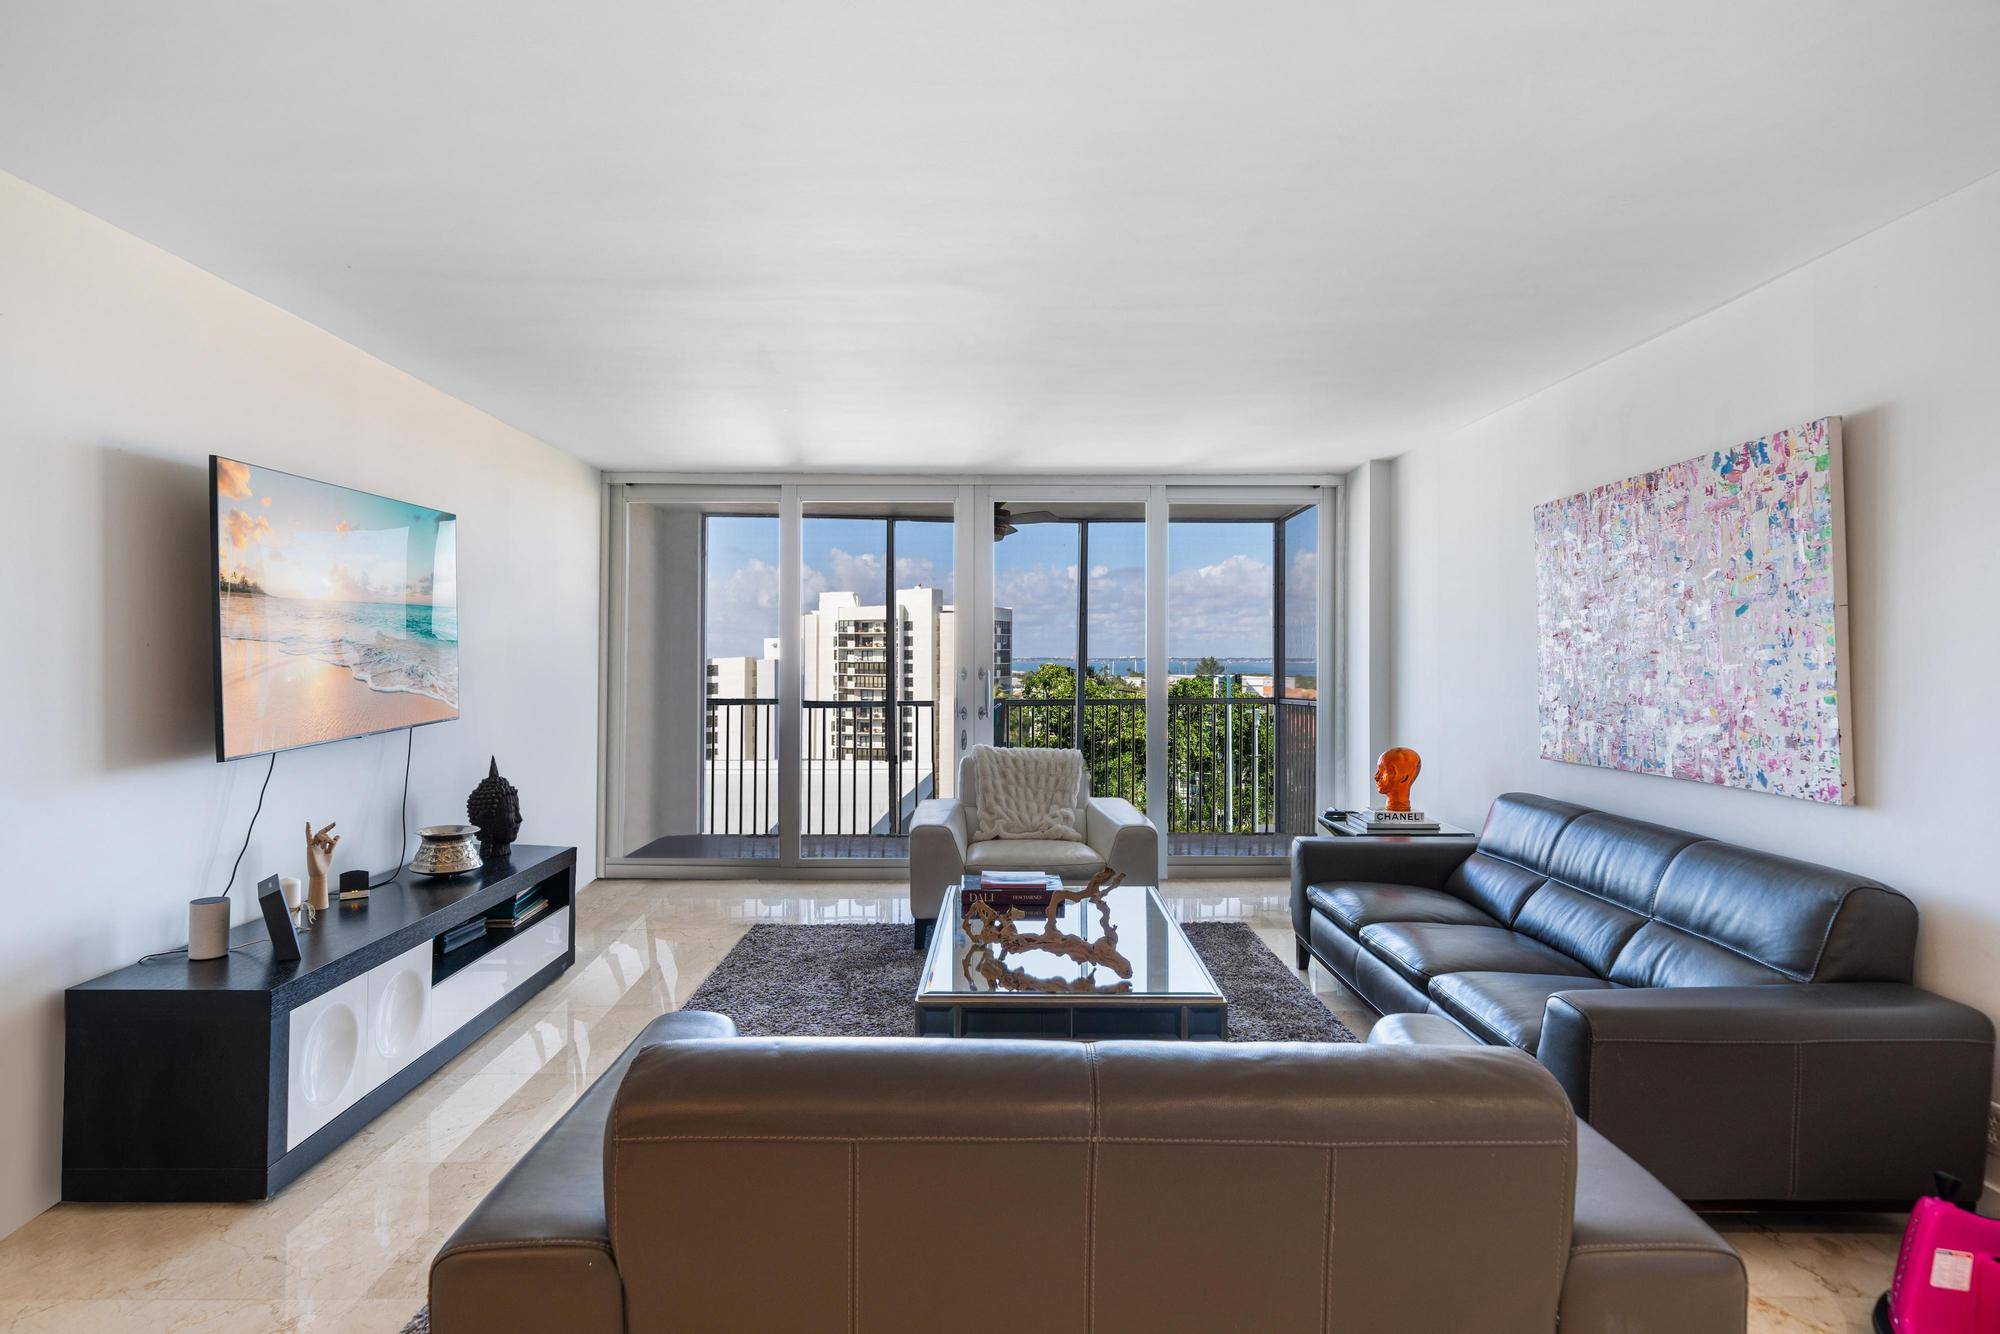 Key Biscayne | 2 Bed 2 Bath | 1,335 SqFt | Open Ocean and City Views | For Rent